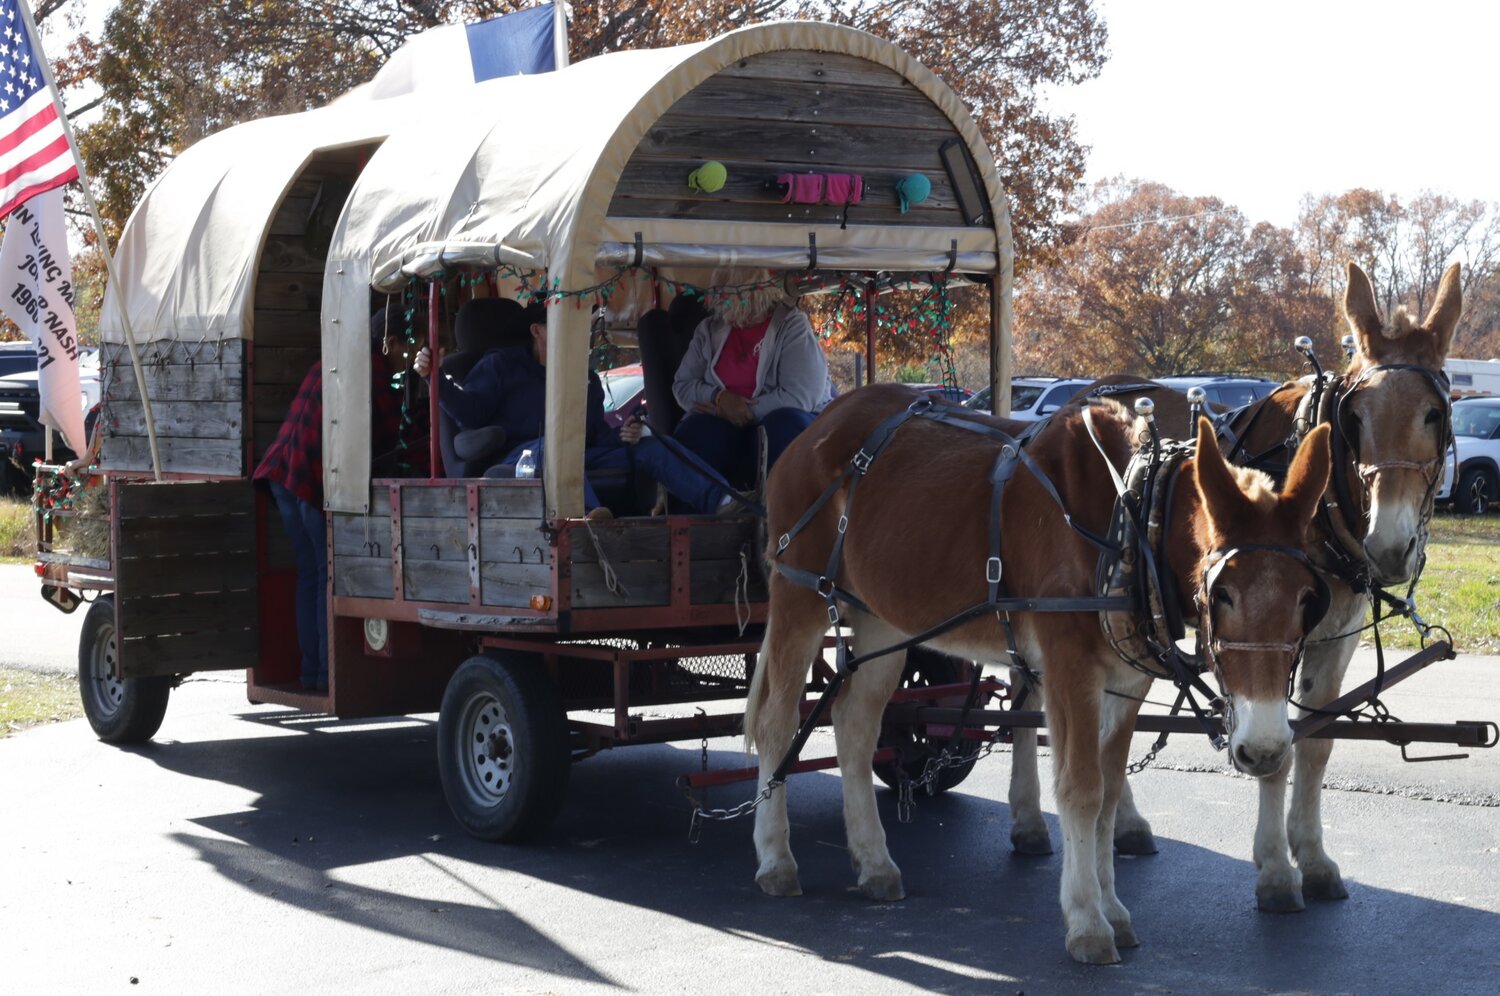 The pulling team of Molly and Dolly under the care of Hubert and Kim White of Edgewood provided wagon rides at the winter extraganza at Alba-Golden